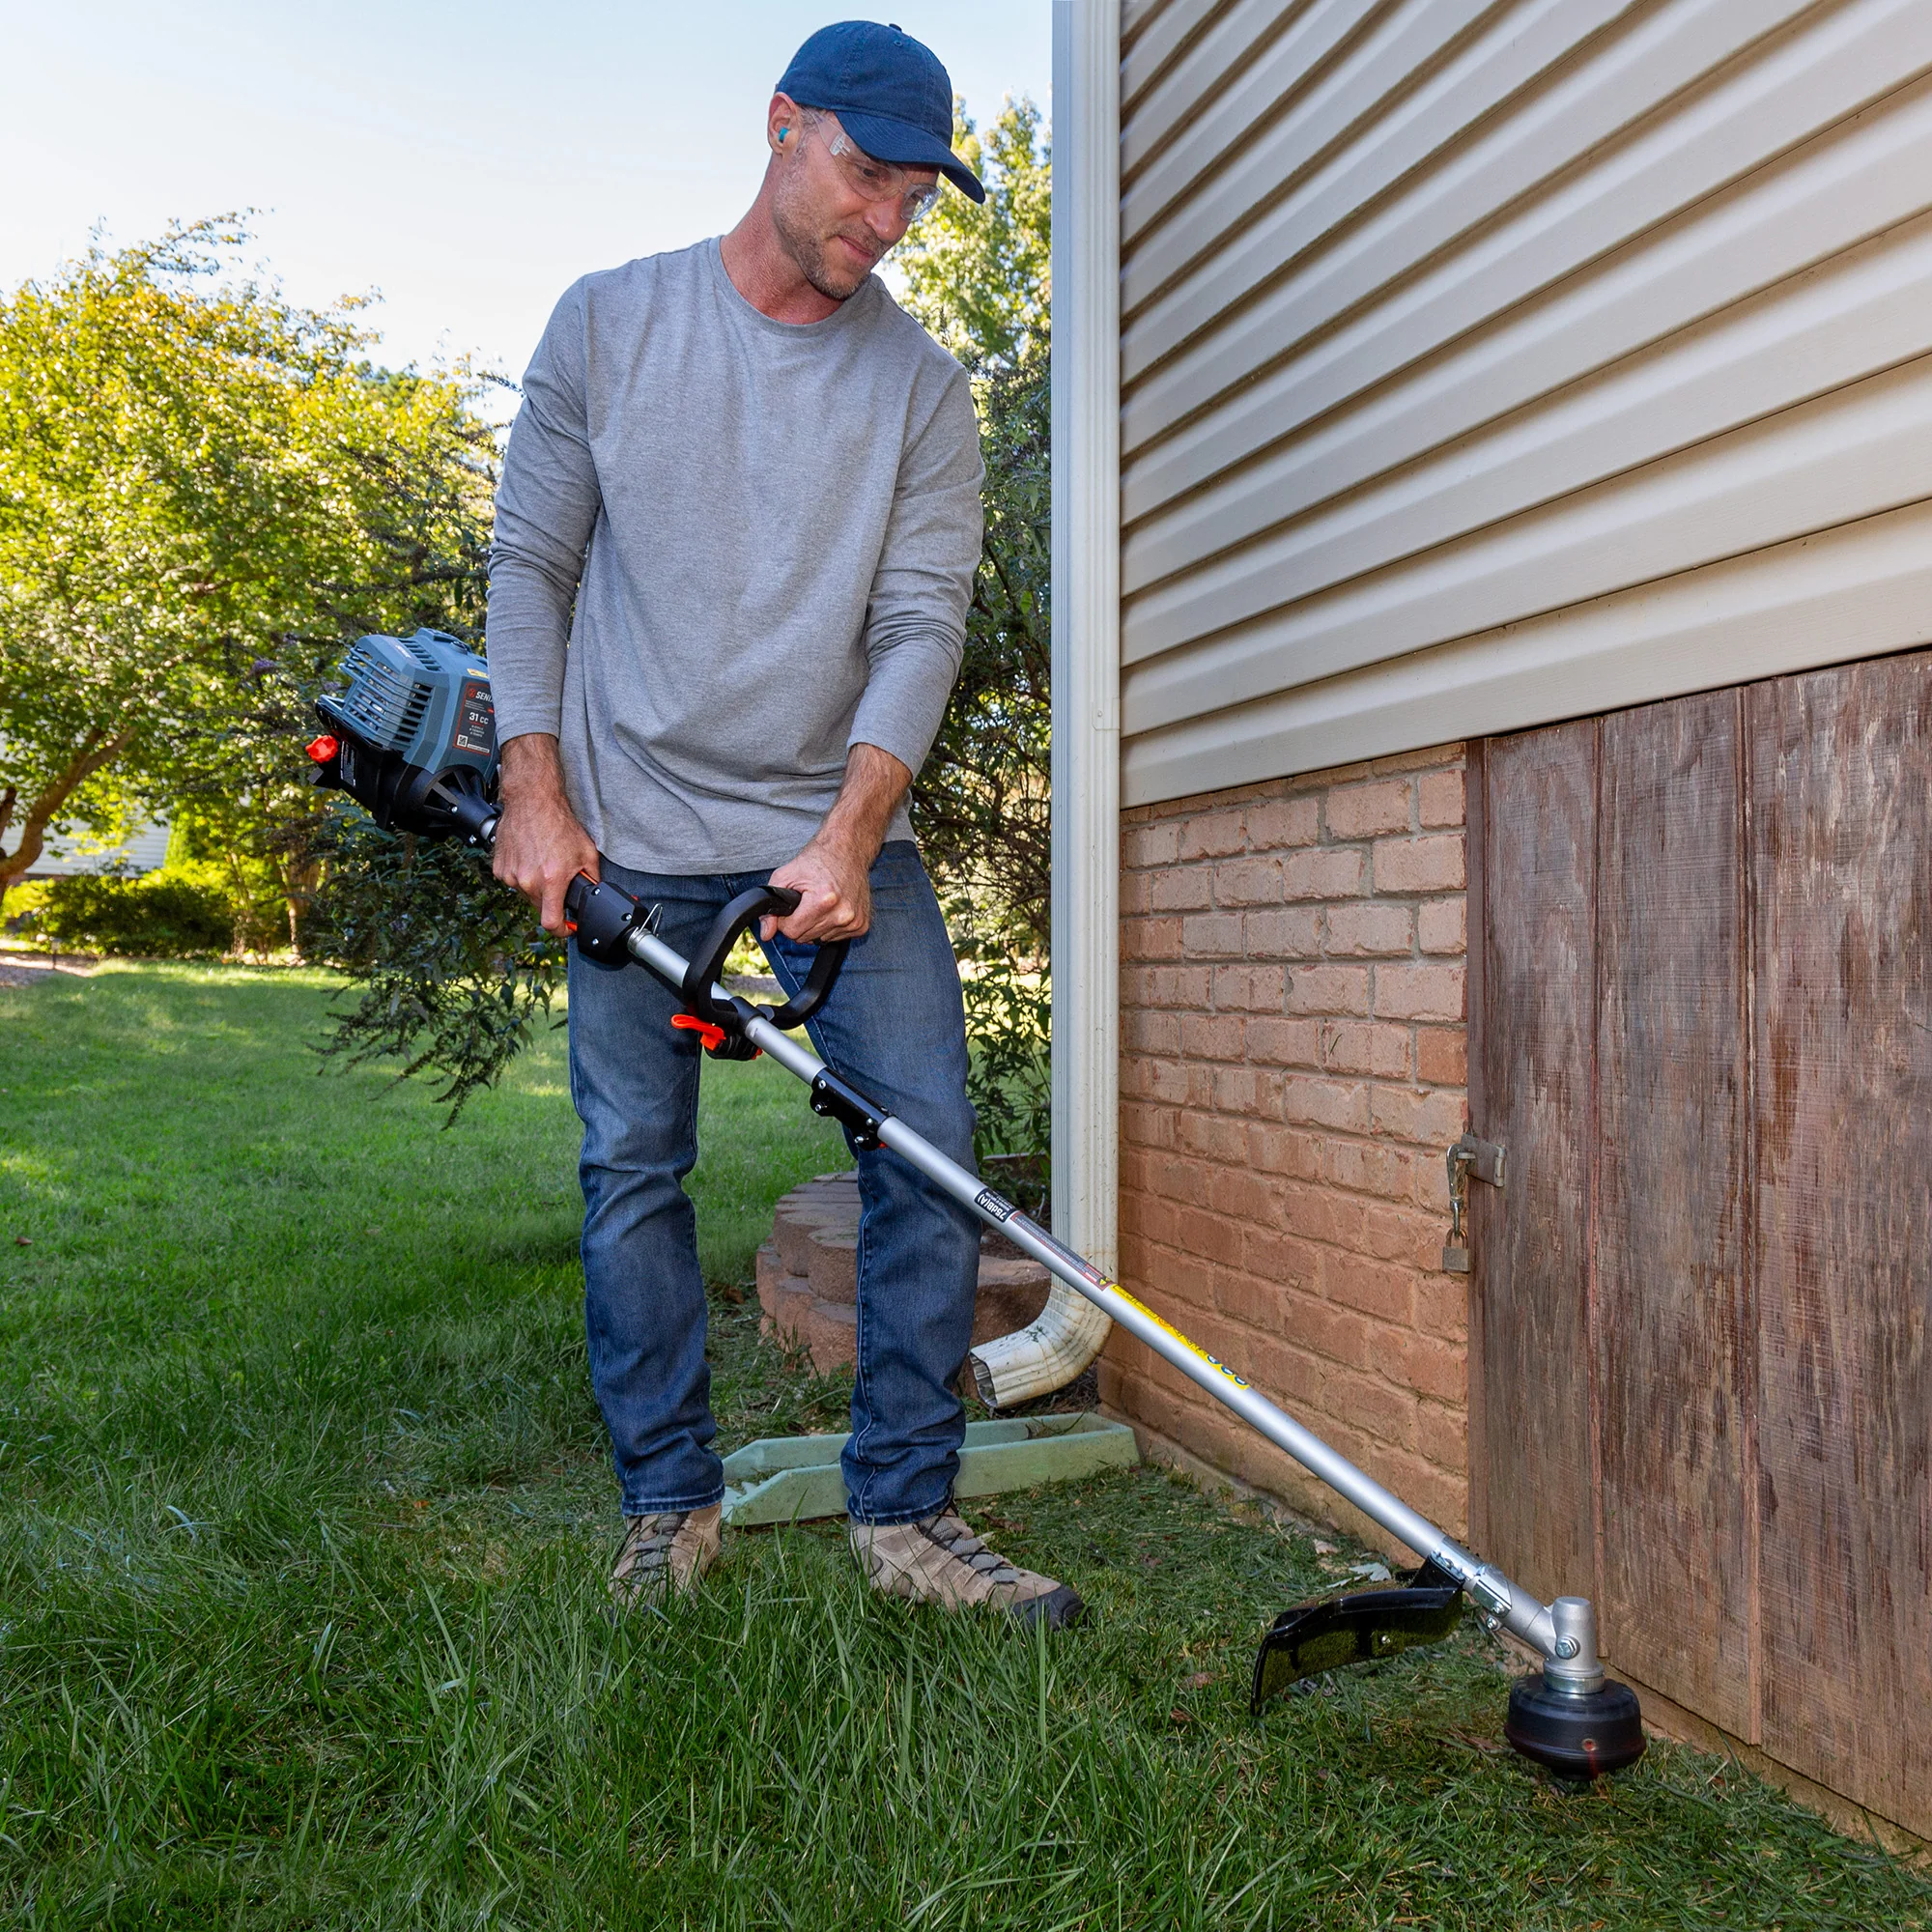 Learn Why SENIX Tools’ Weed Wackers Are the Best Option for Your Yard Maintenance Jobs